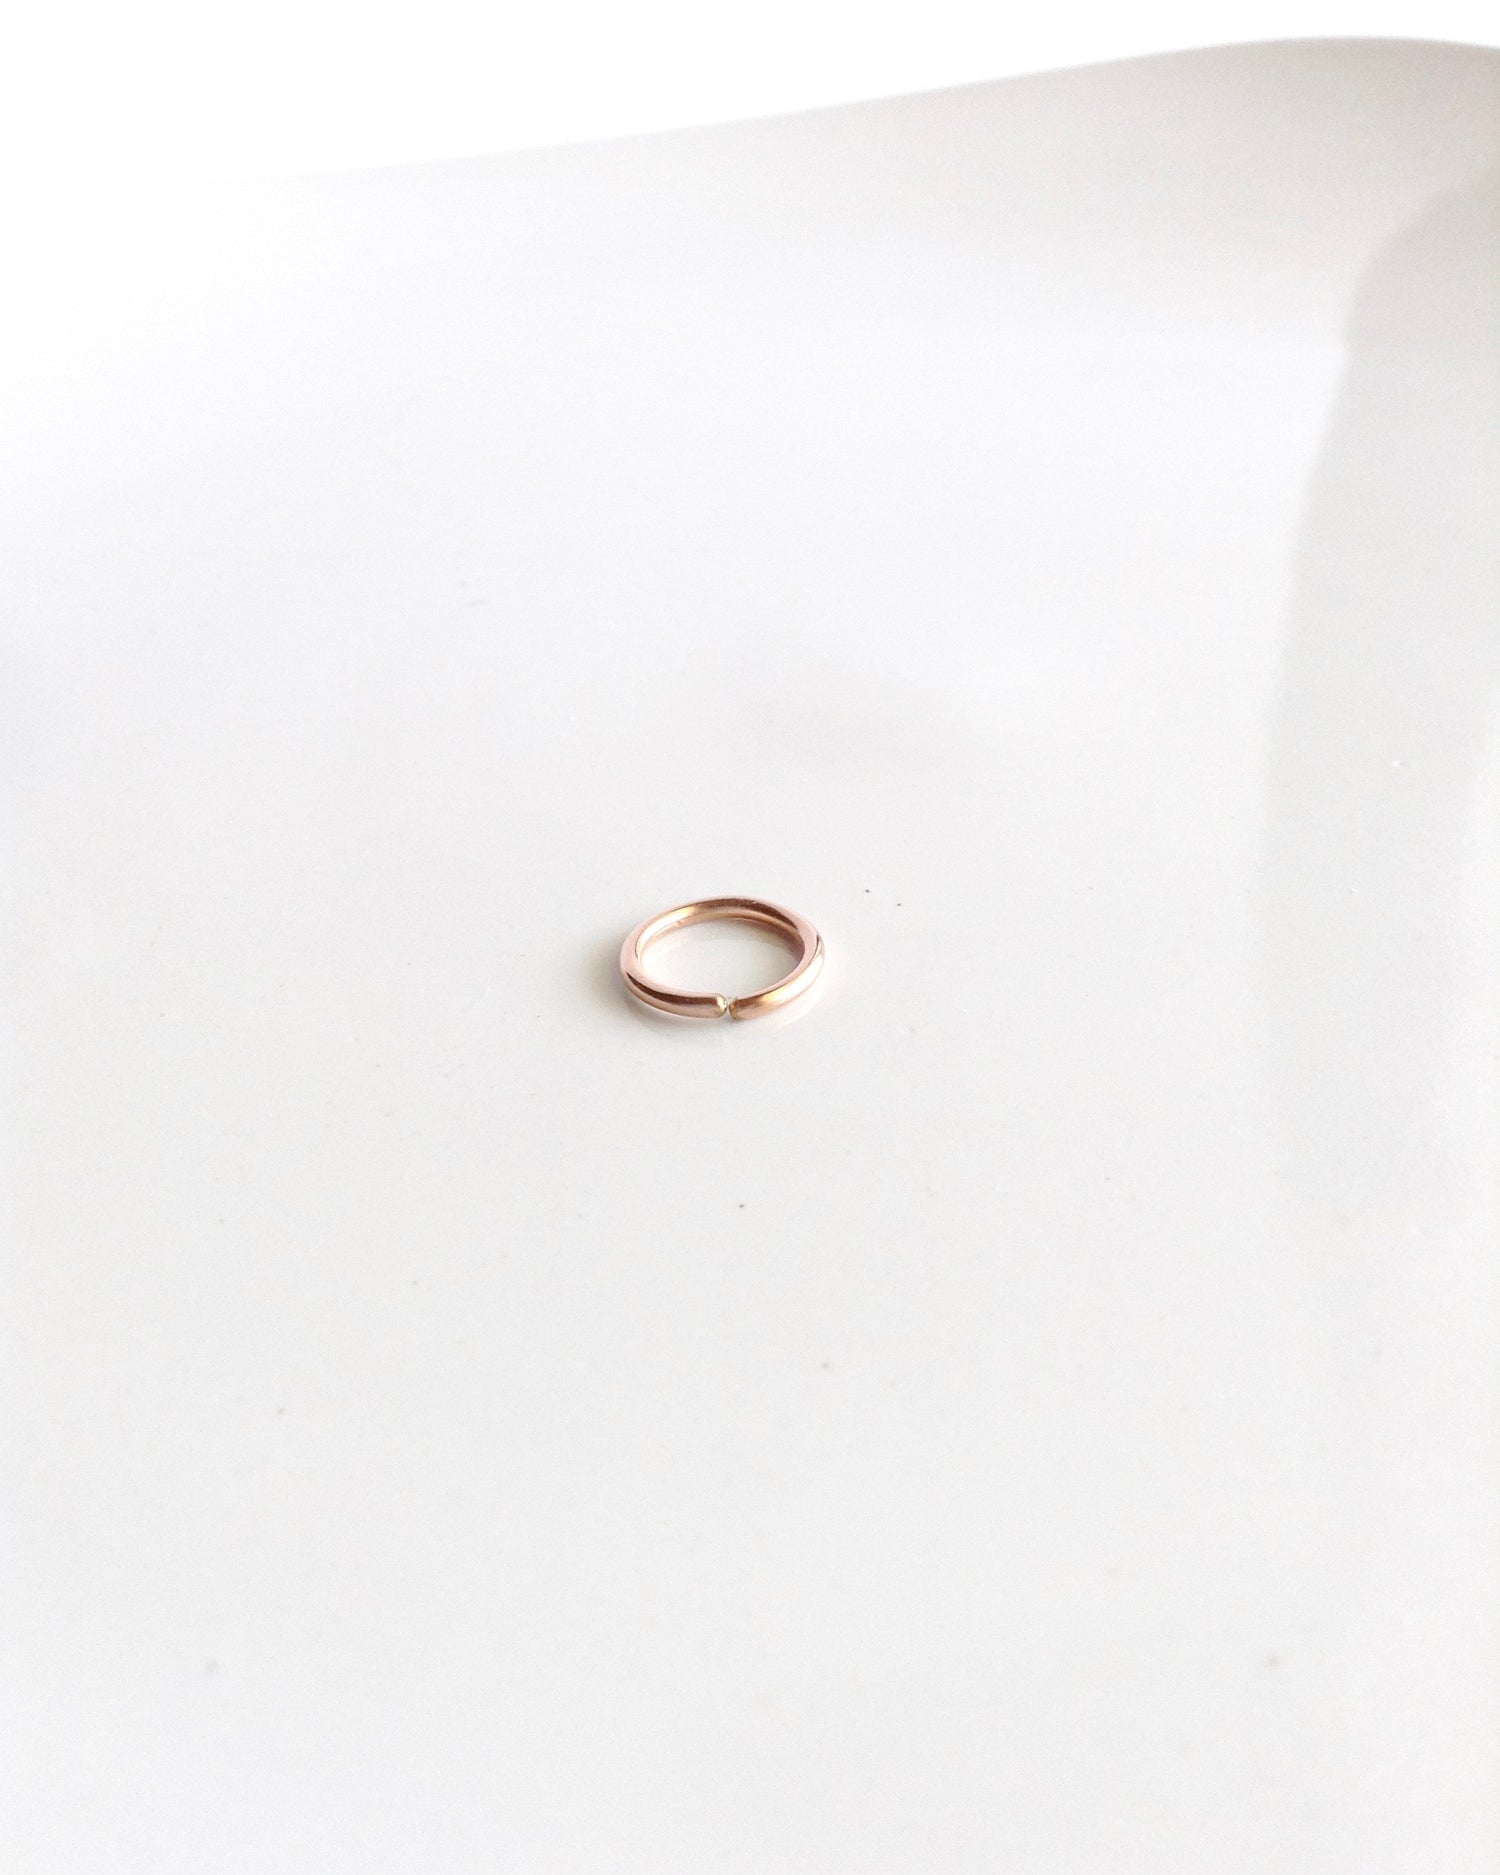 Endless Sterling Silver Gold Filled or Rose Gold Filled Nose Hoop | IB Jewelry